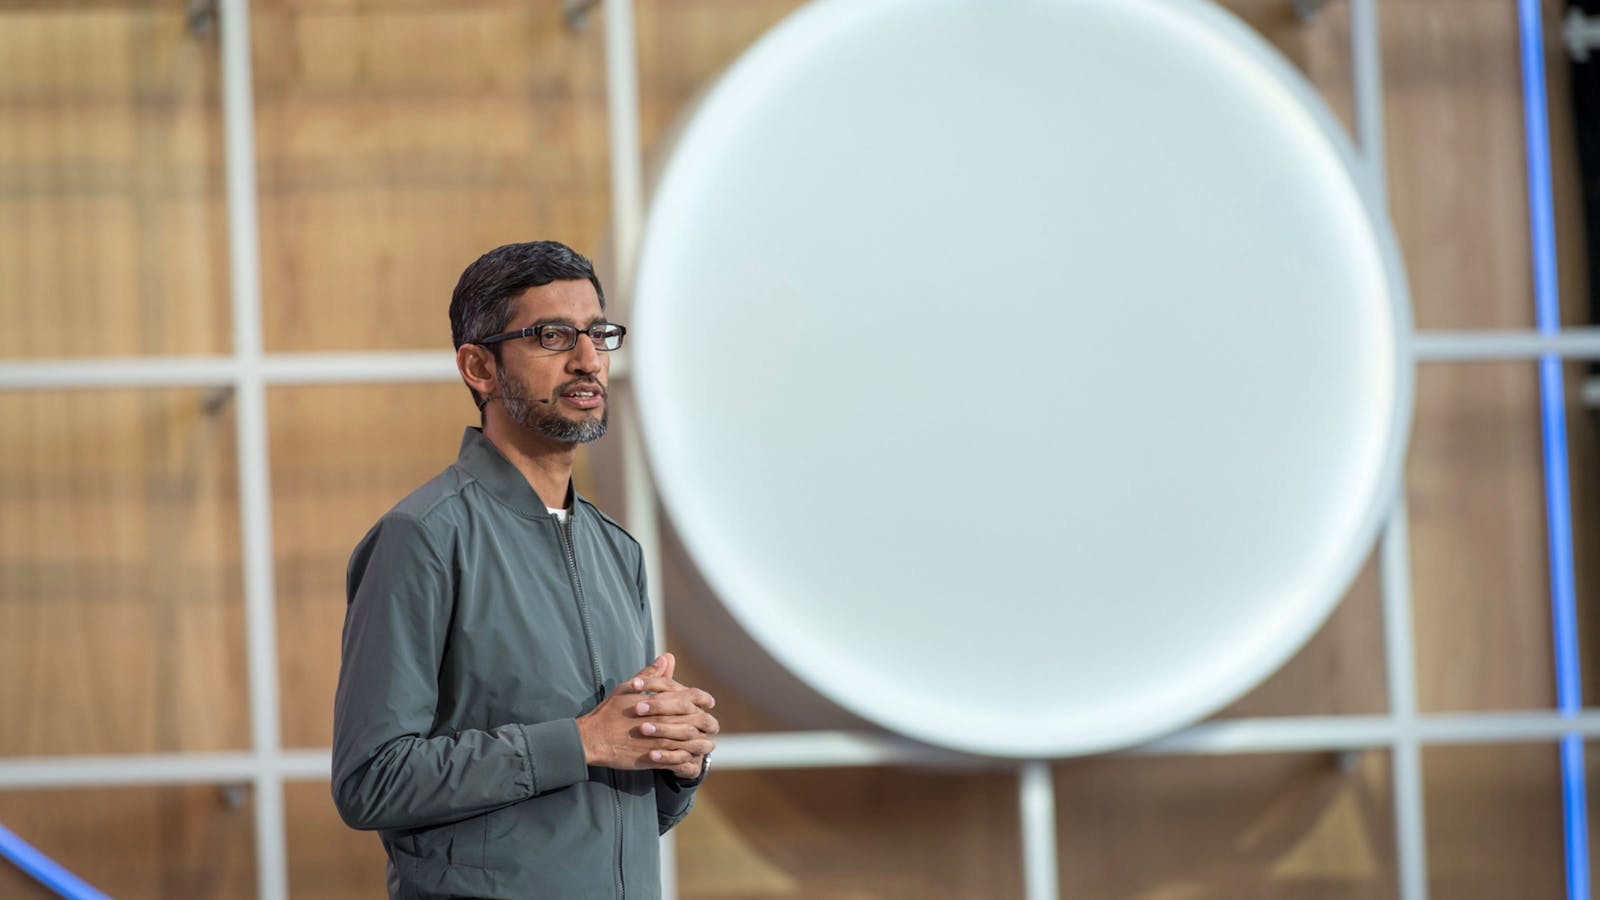 Google CEO Sundar Pichai at last year's Google I/O conference. Photo by Bloomberg